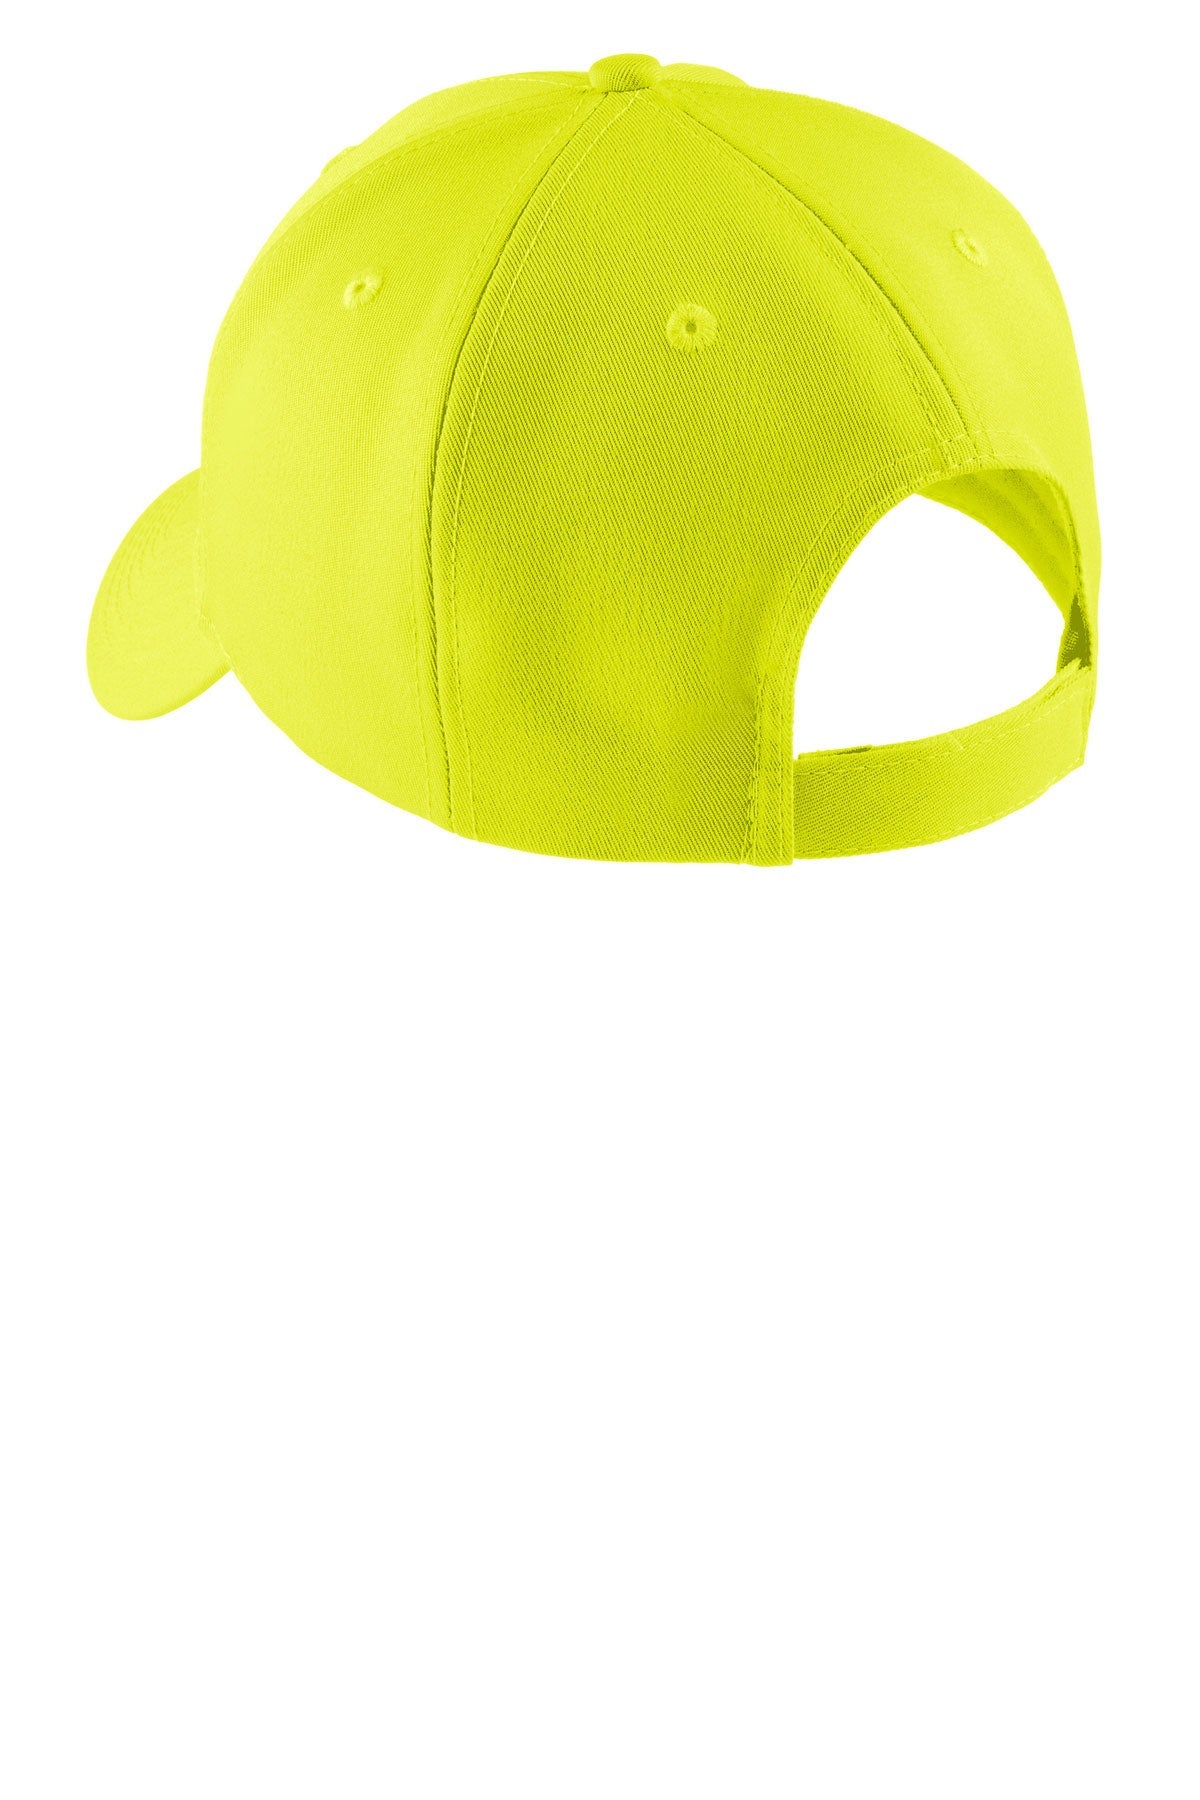 Port Authority Solid Enhanced Custom Visibility Caps, Safety Yellow